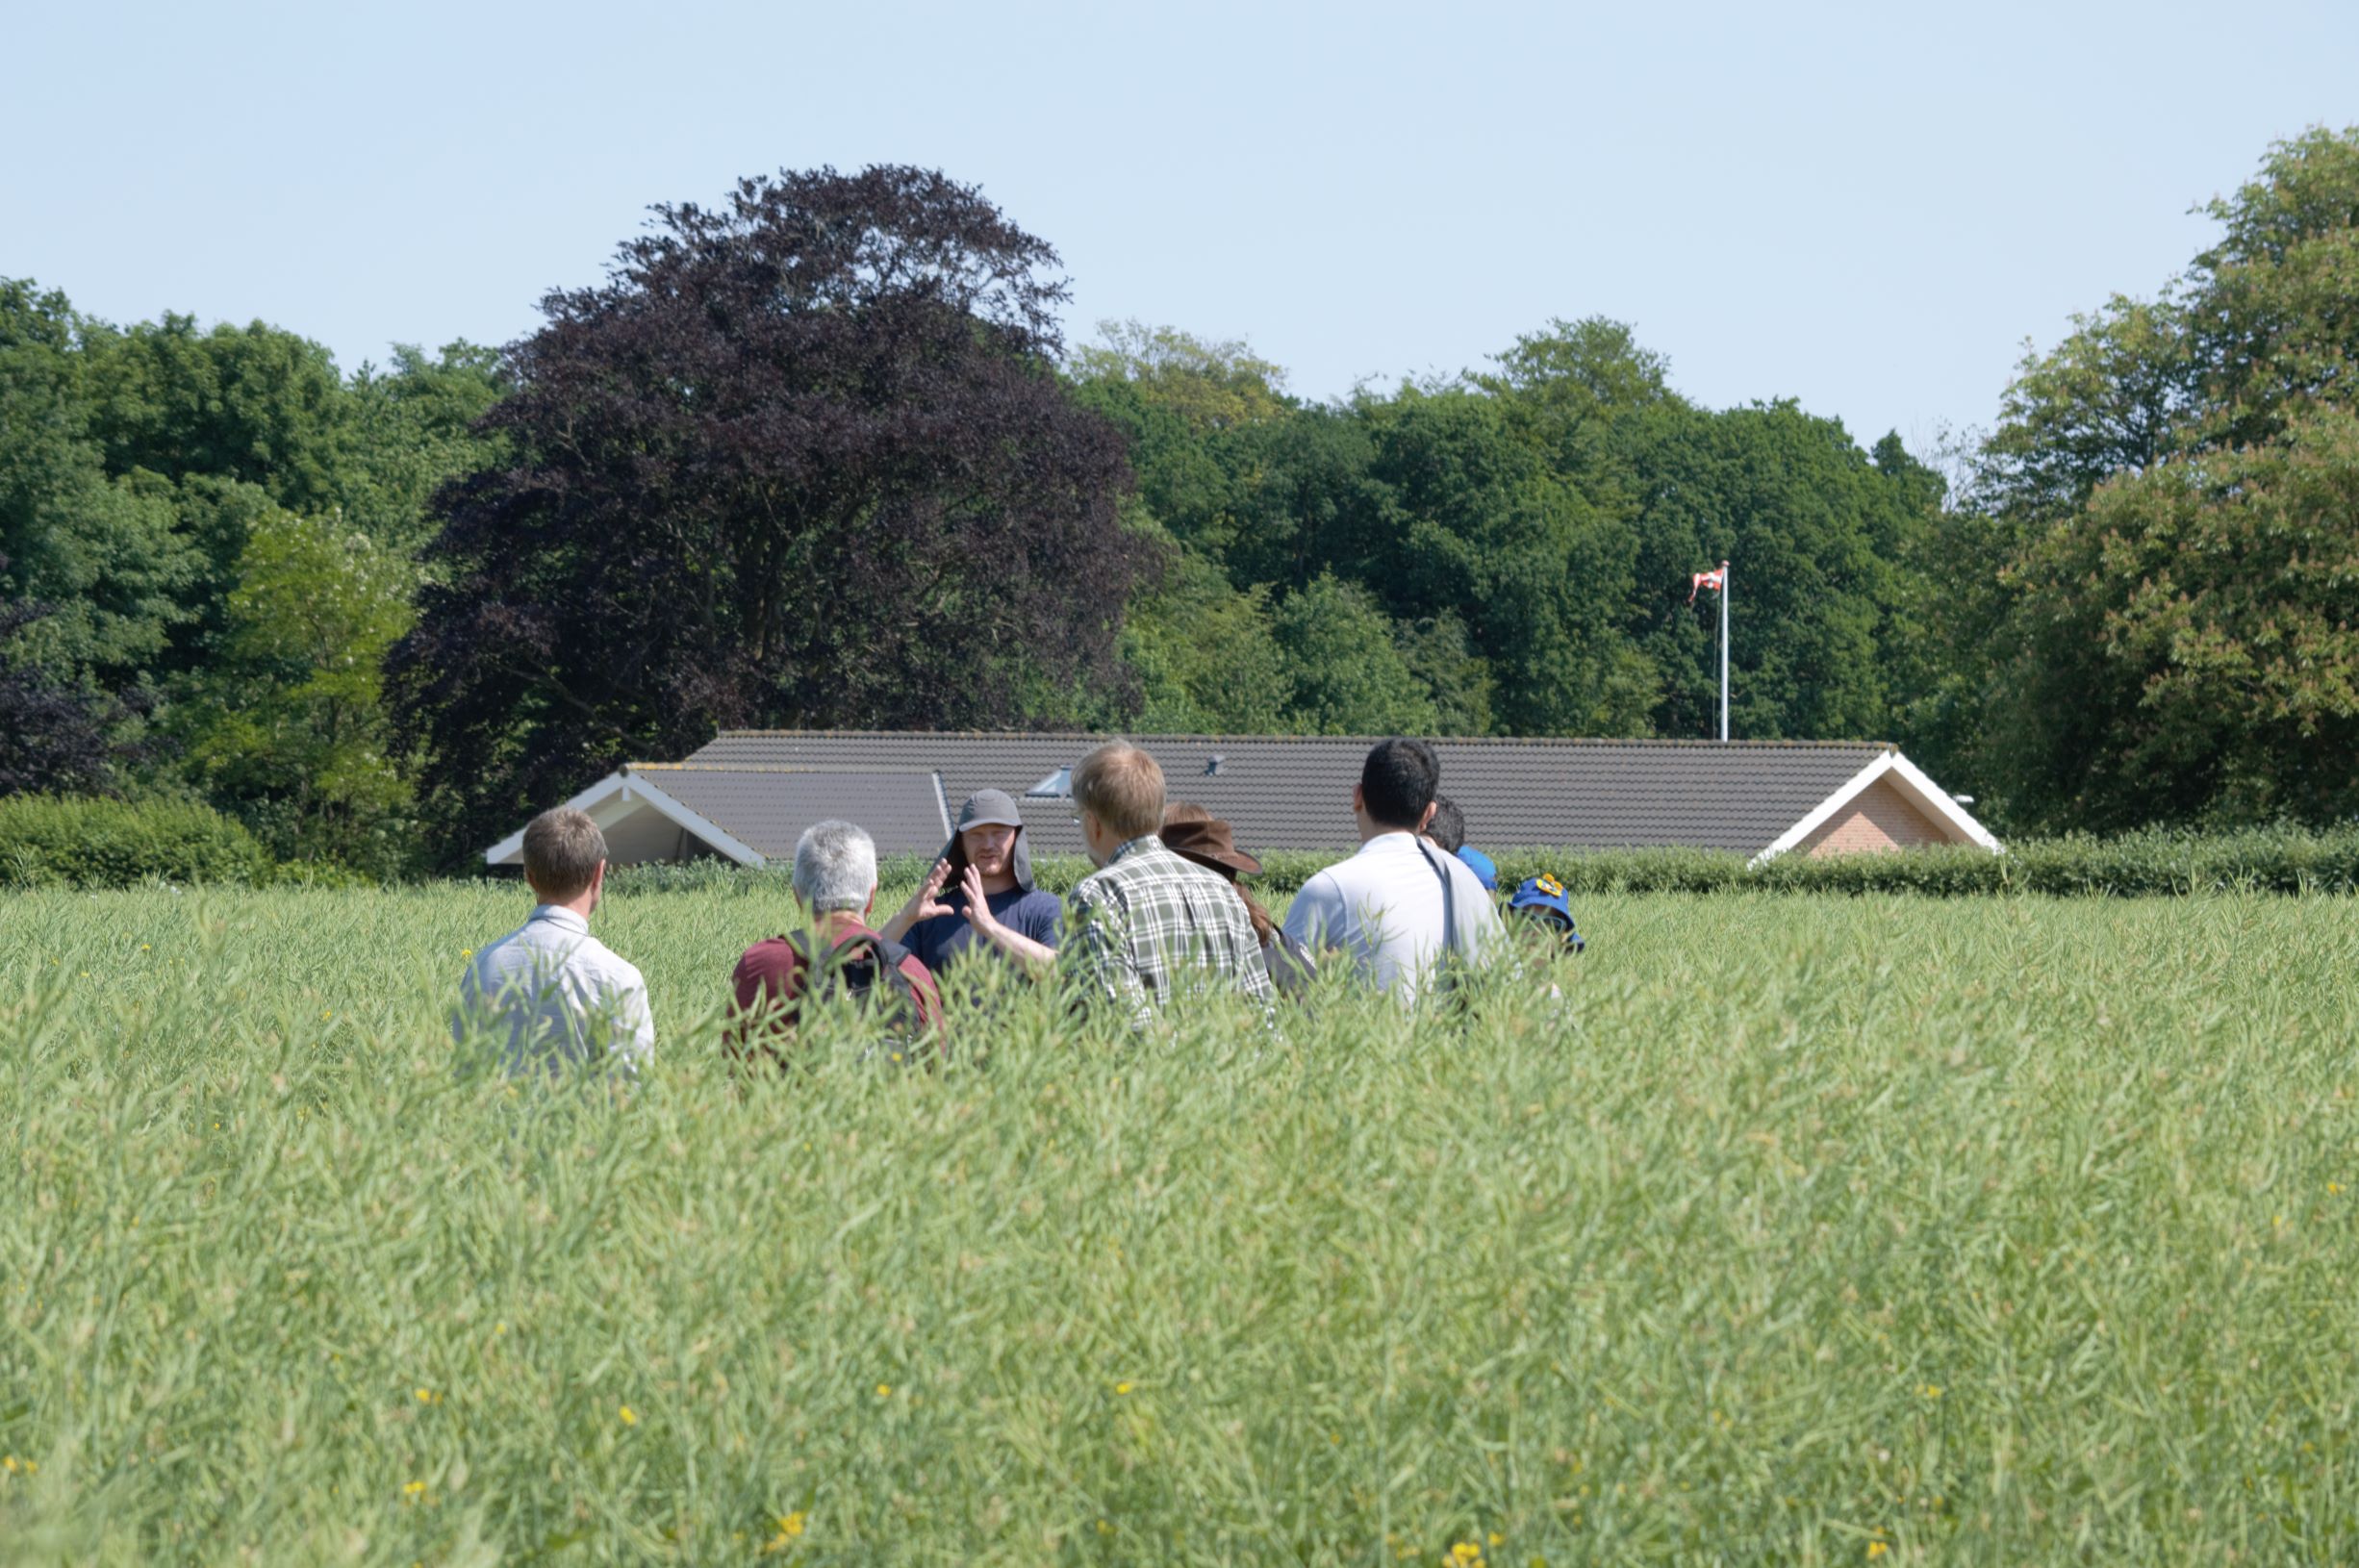 People in discussion in a field